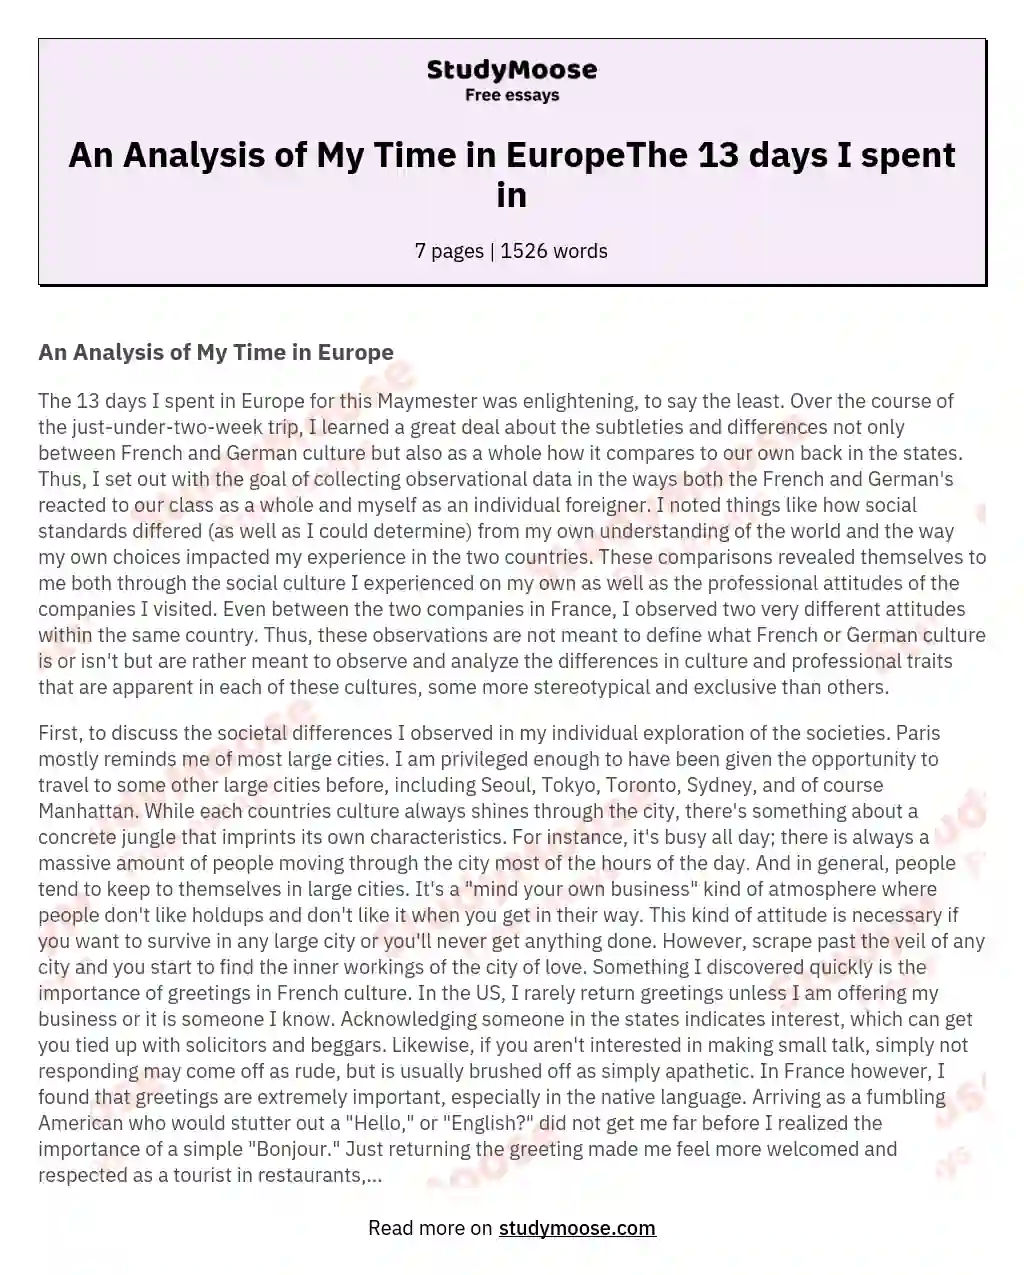 An Analysis of My Time in EuropeThe 13 days I spent in essay